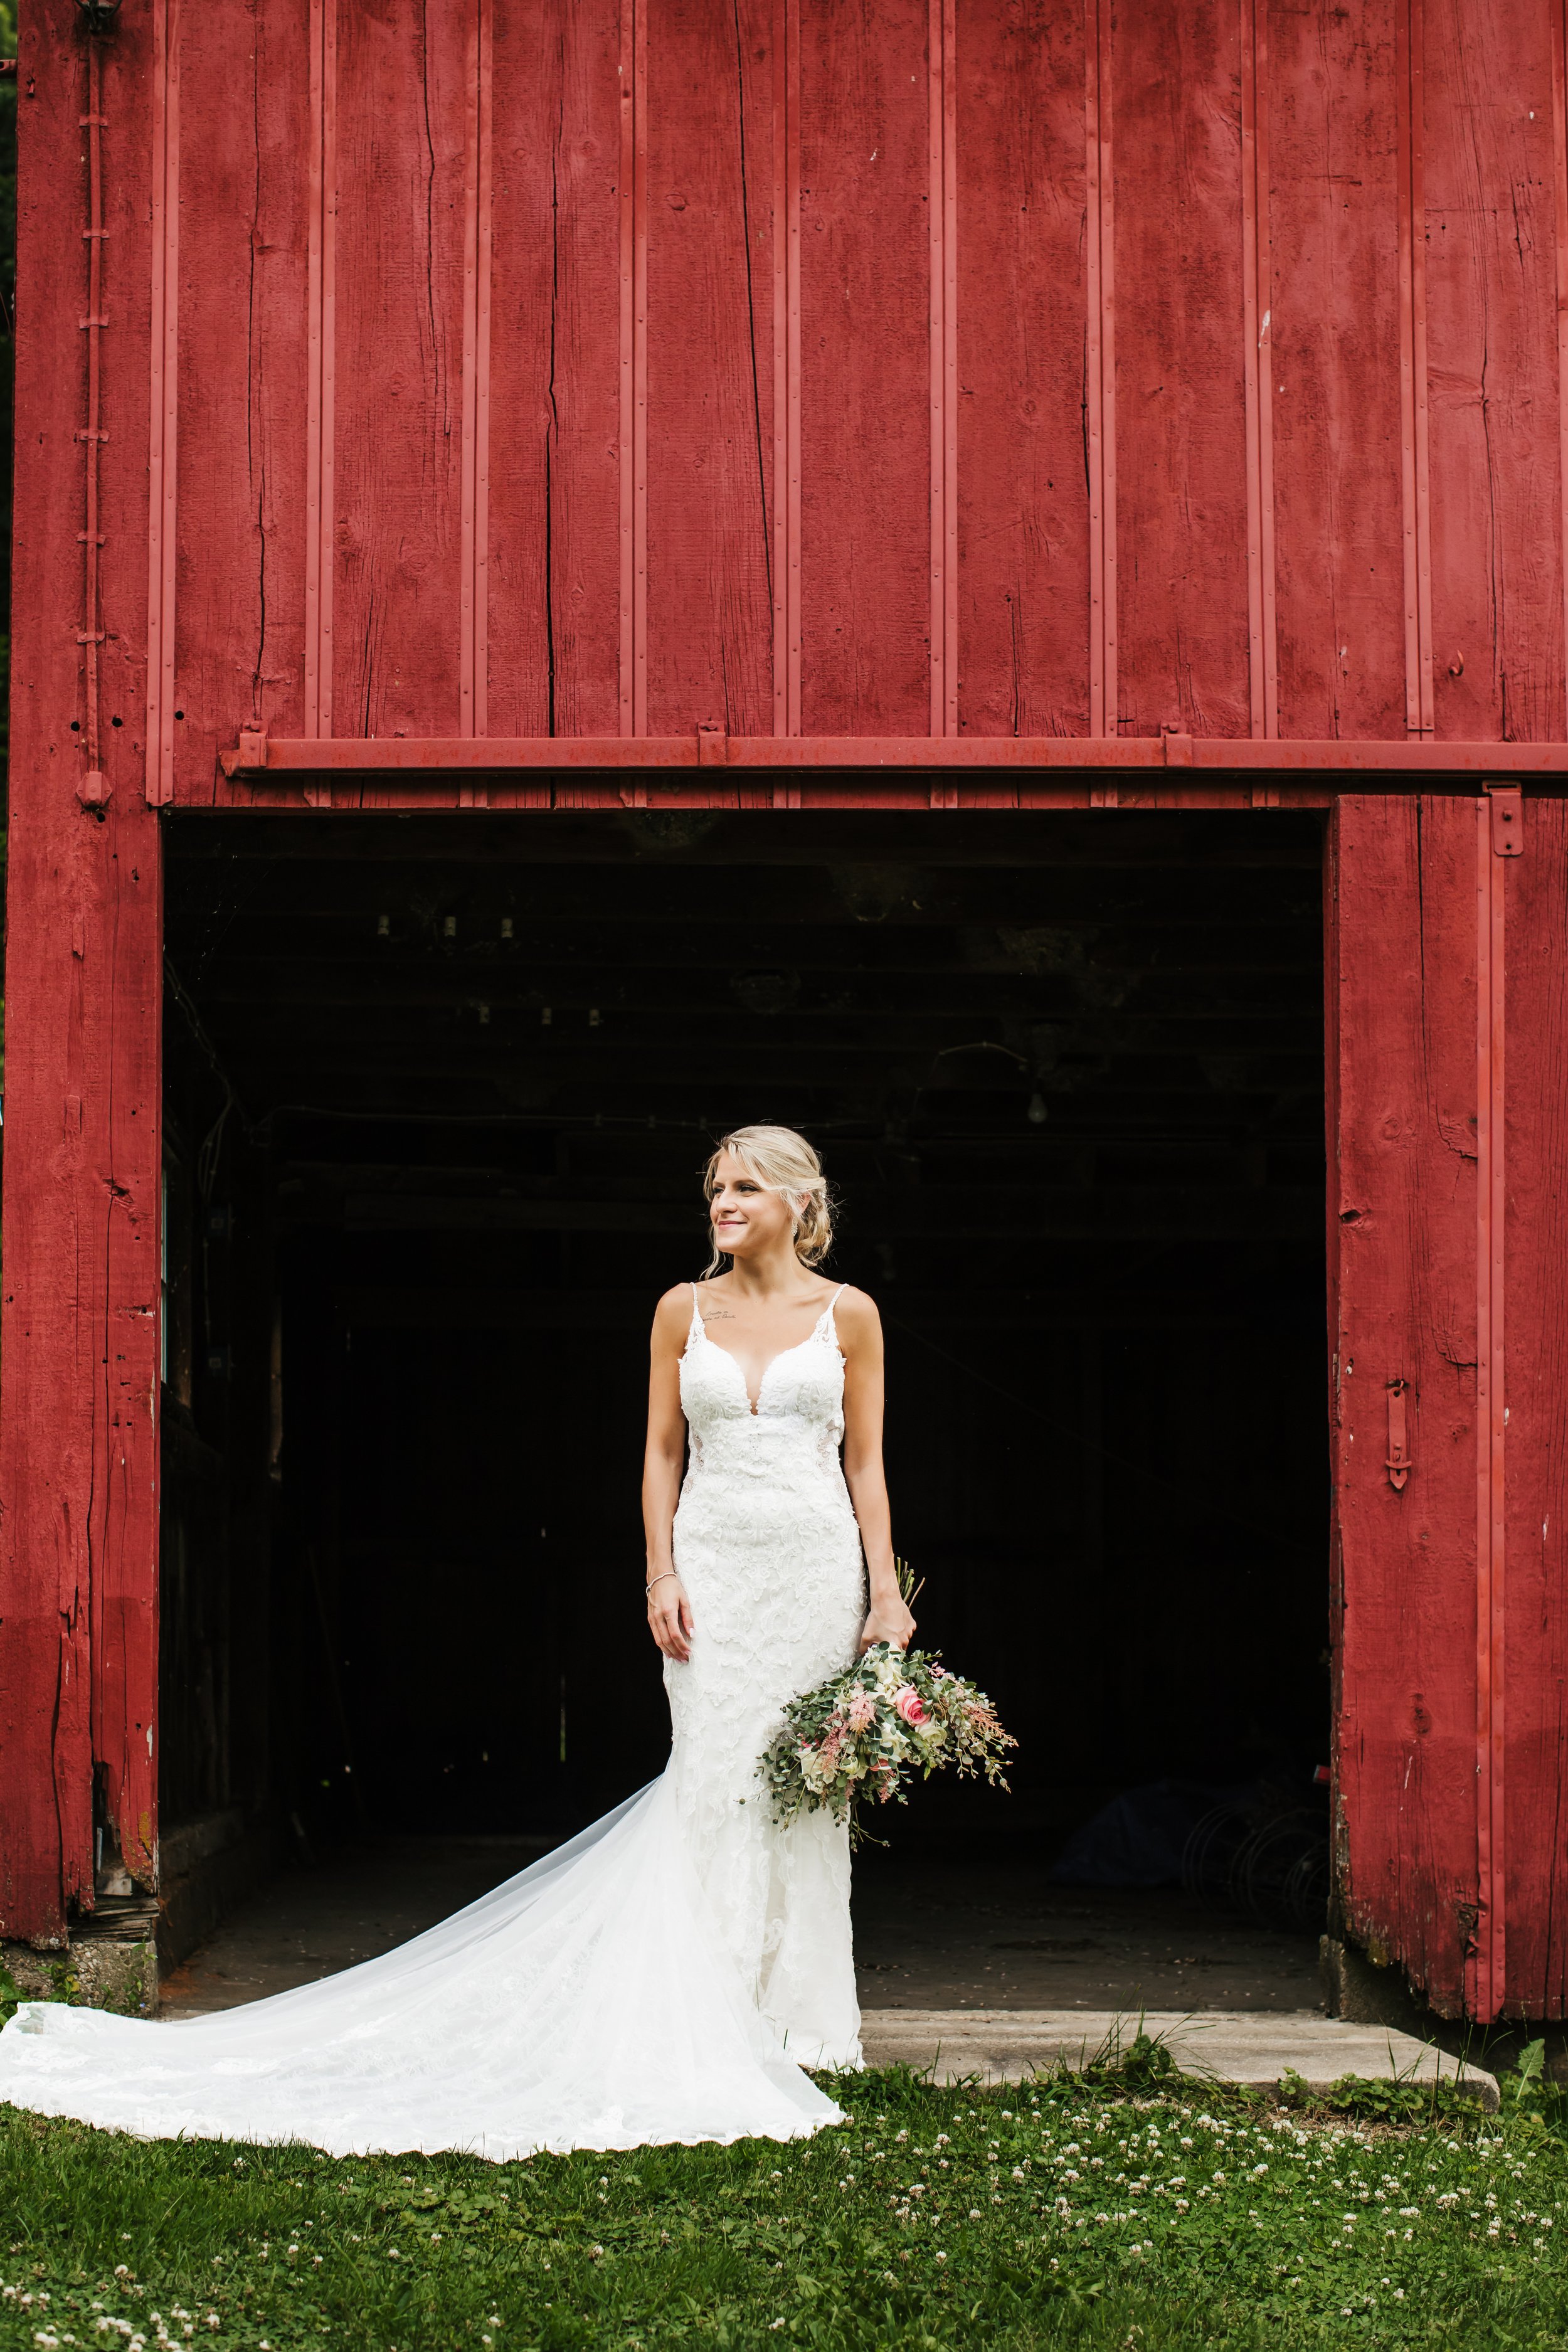  Bridal portraits in front of a red barn. lace wedding dress has a long train bouquet of roses and greenery bride intimate wedding #TealaWardPhotography #illinoisphotographer #princetonillinois #weddingphotographer #intimatewedding 